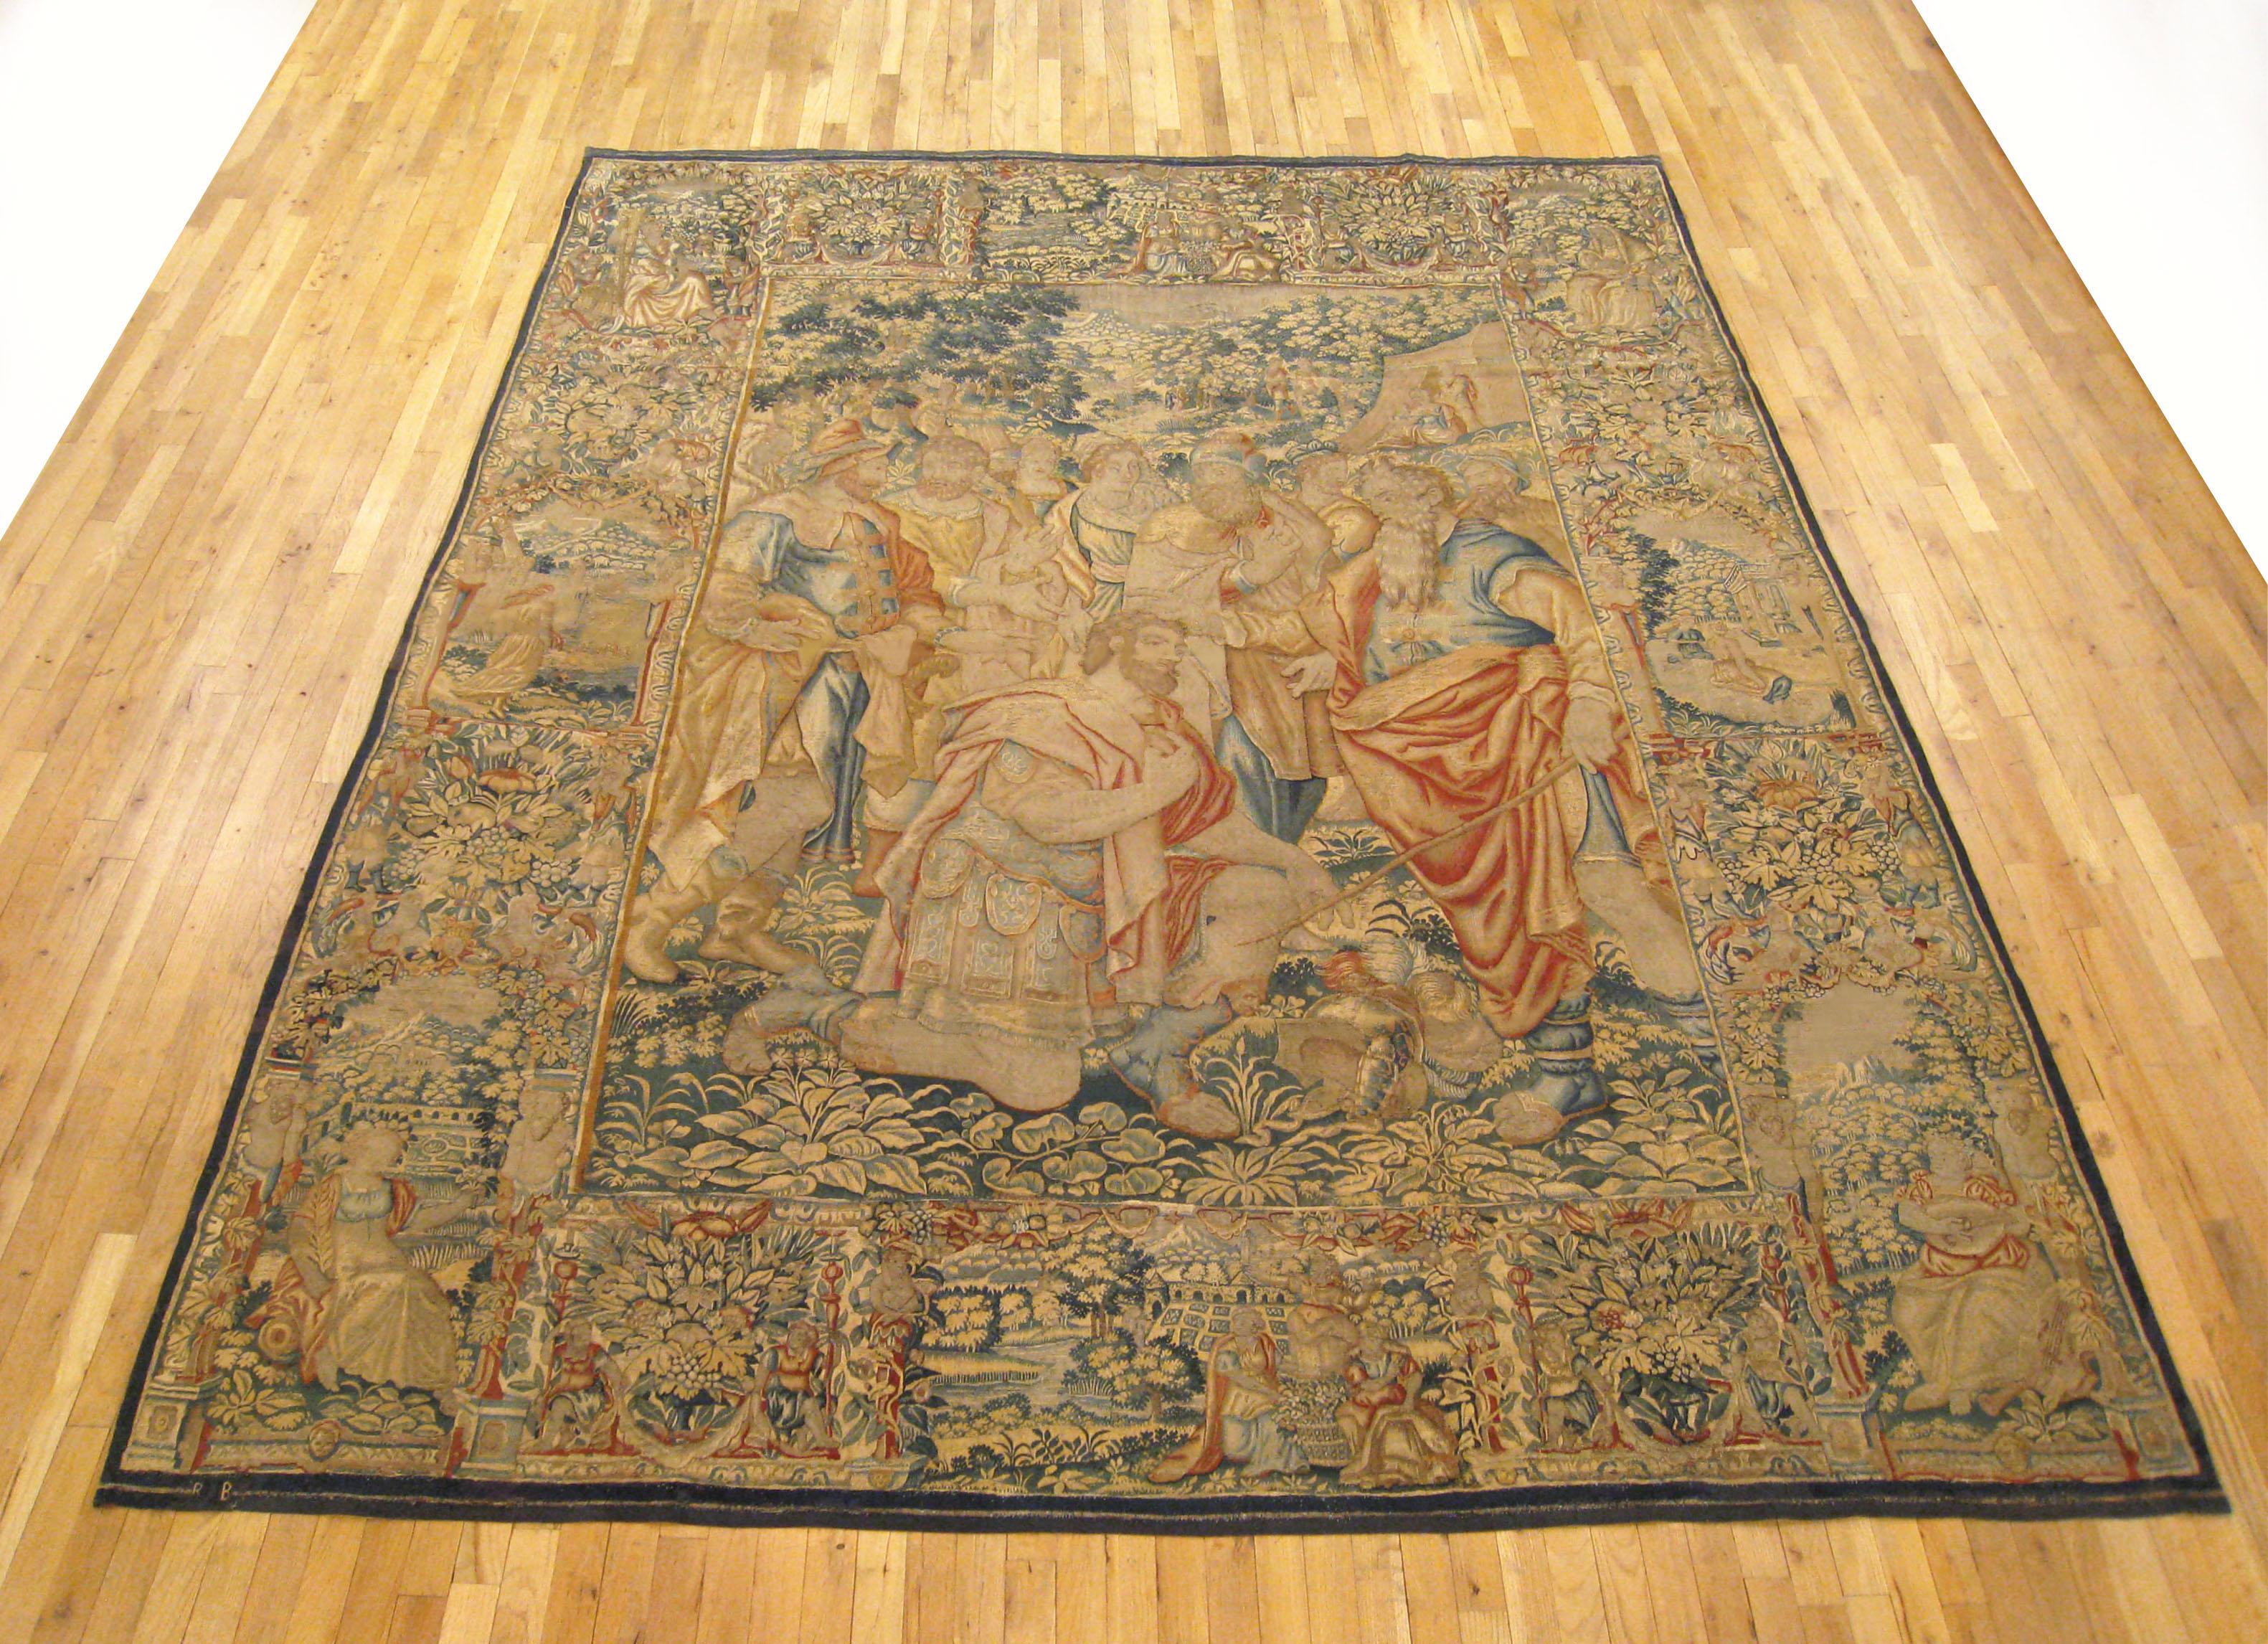 An antique Brussels biblical tapestry from the late 16th century, attributed to Jan (Ian) Raes, depicting Moses at right, with Joshua kneeling before him in the sophisticatedly rendered central field. Enclosed by a wide primary border featuring